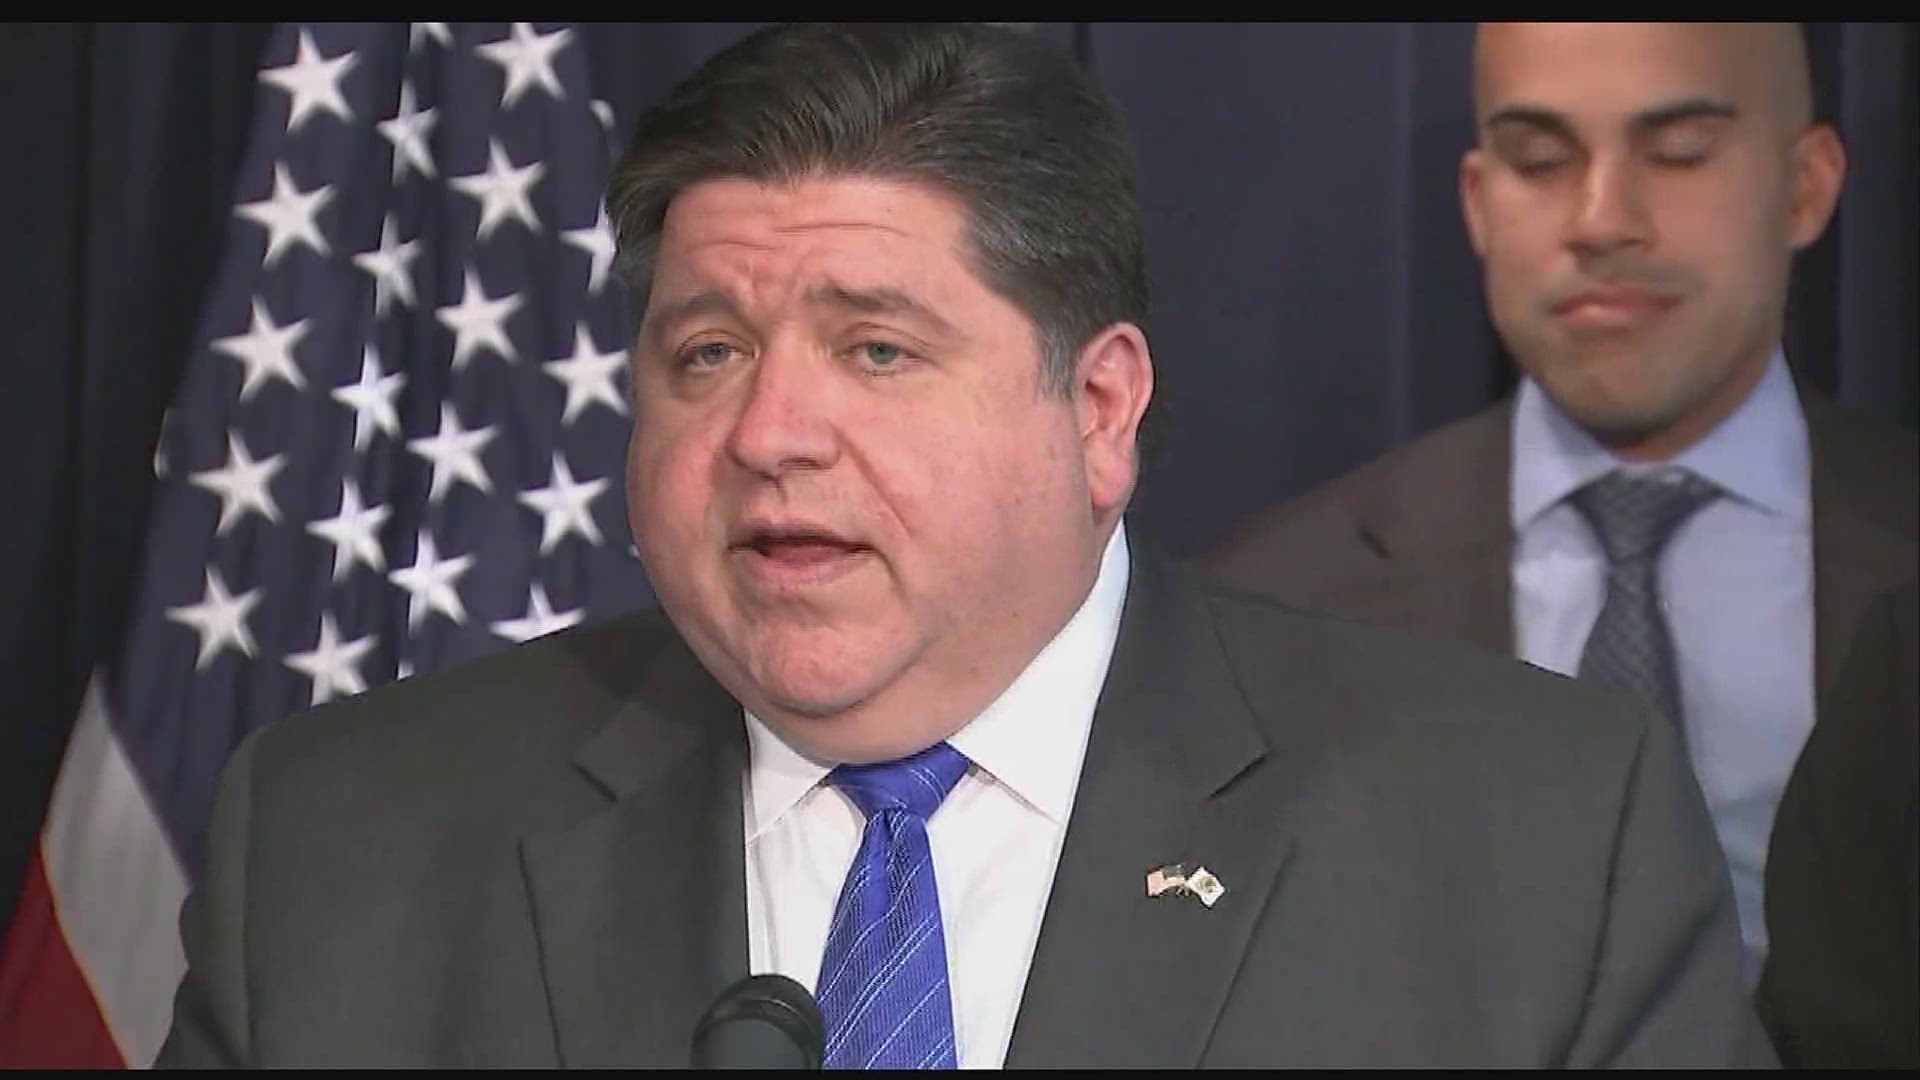 Gov. Pritzker says the state can test for the virus and plans to open up labs around the state as testing sites.